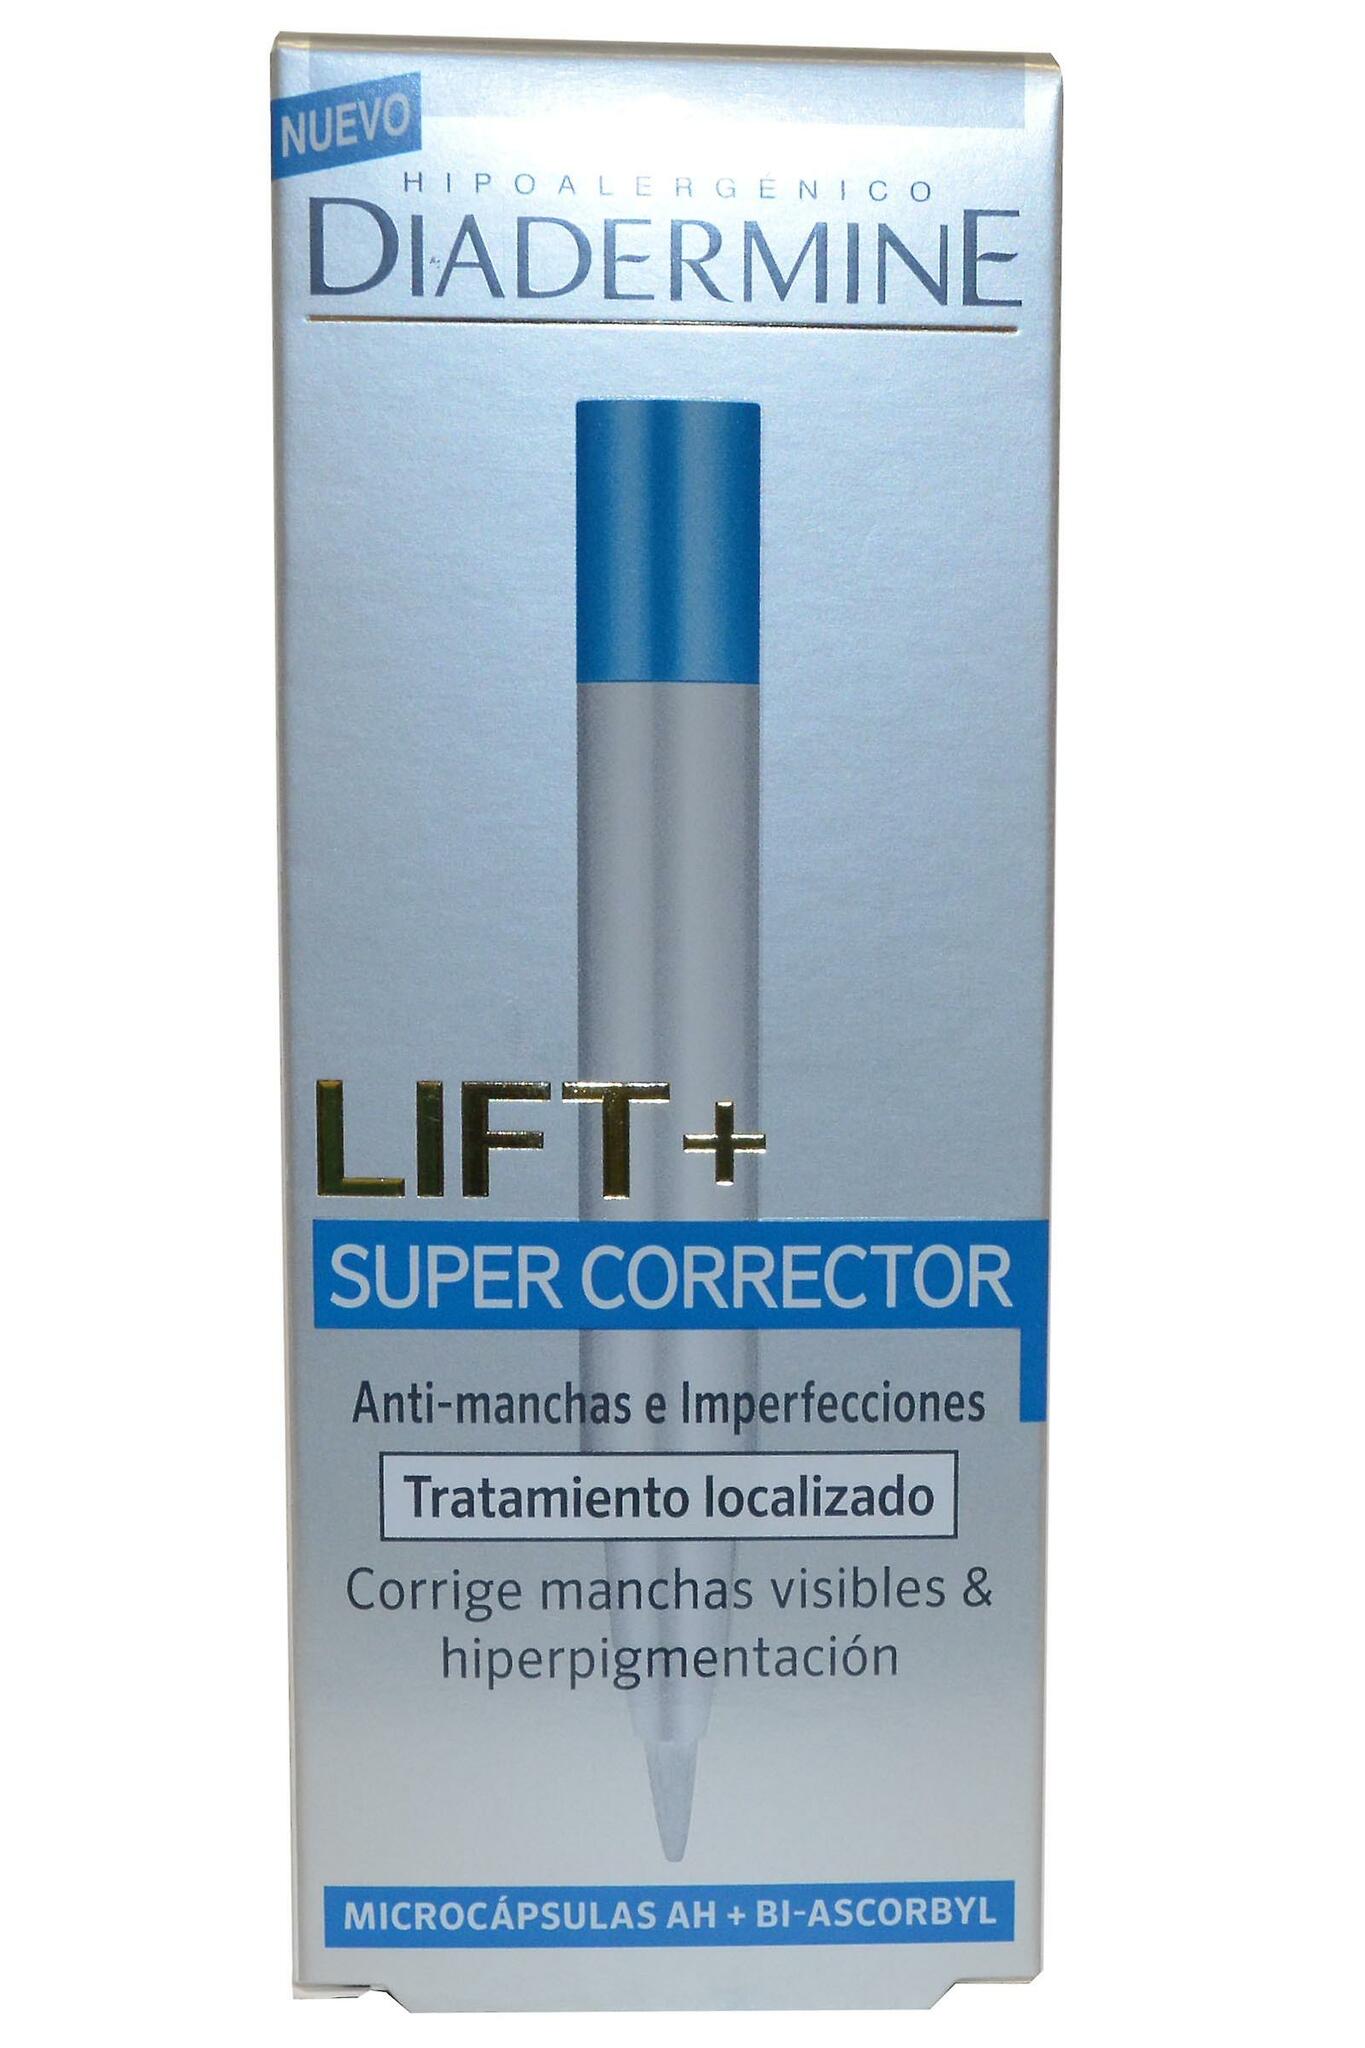 Diadermine Lift+ Super Corrector-Anti Spots and Imperfections